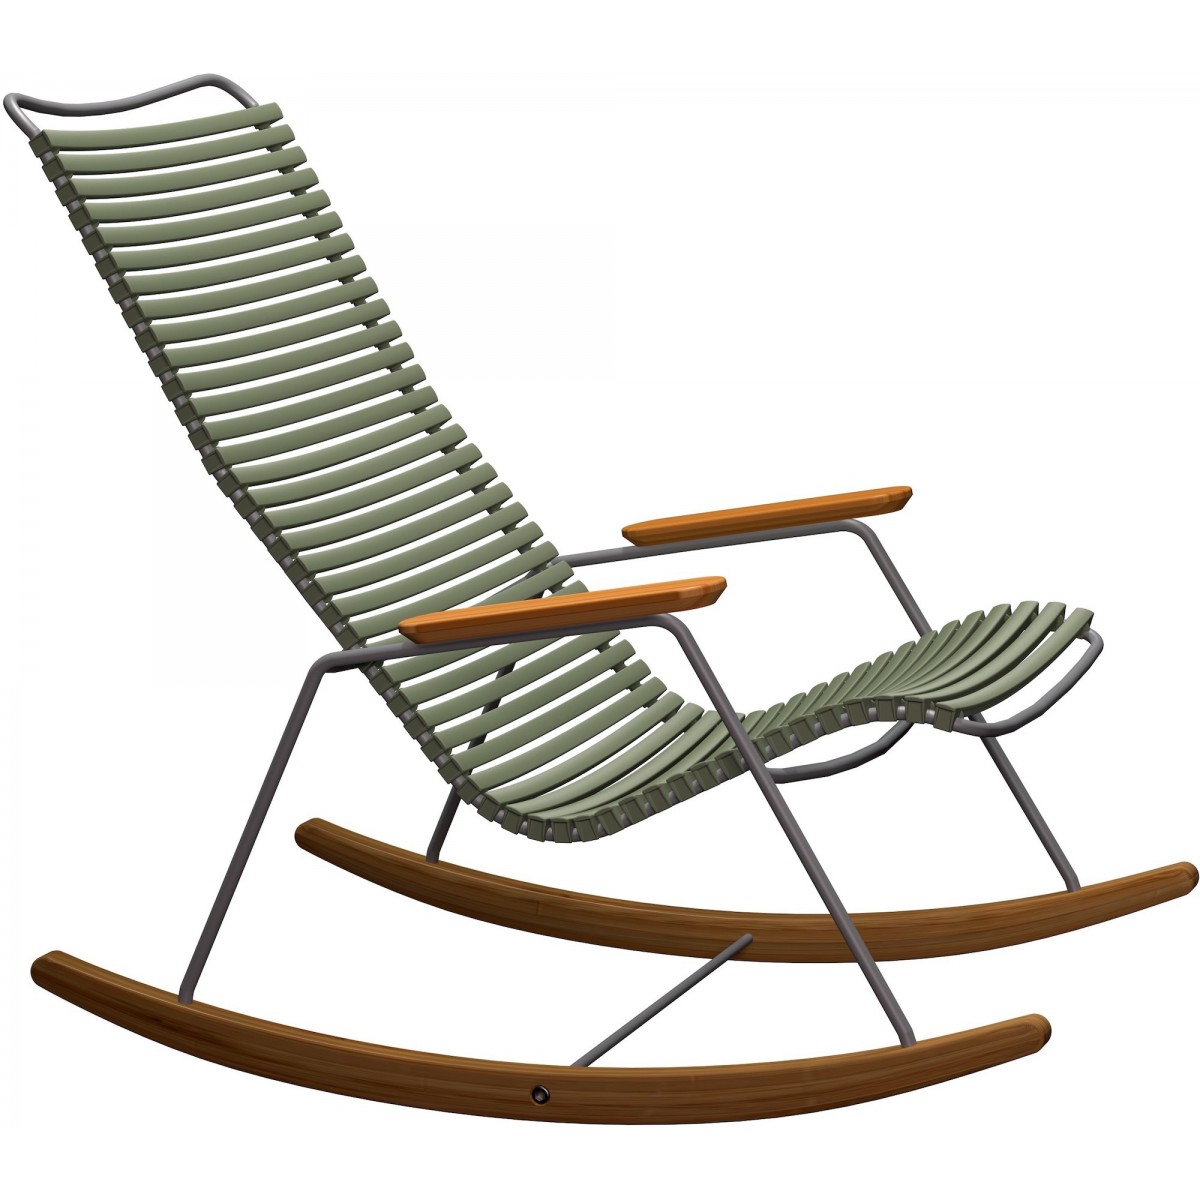 Vert olive (71) - Rocking Chair Click